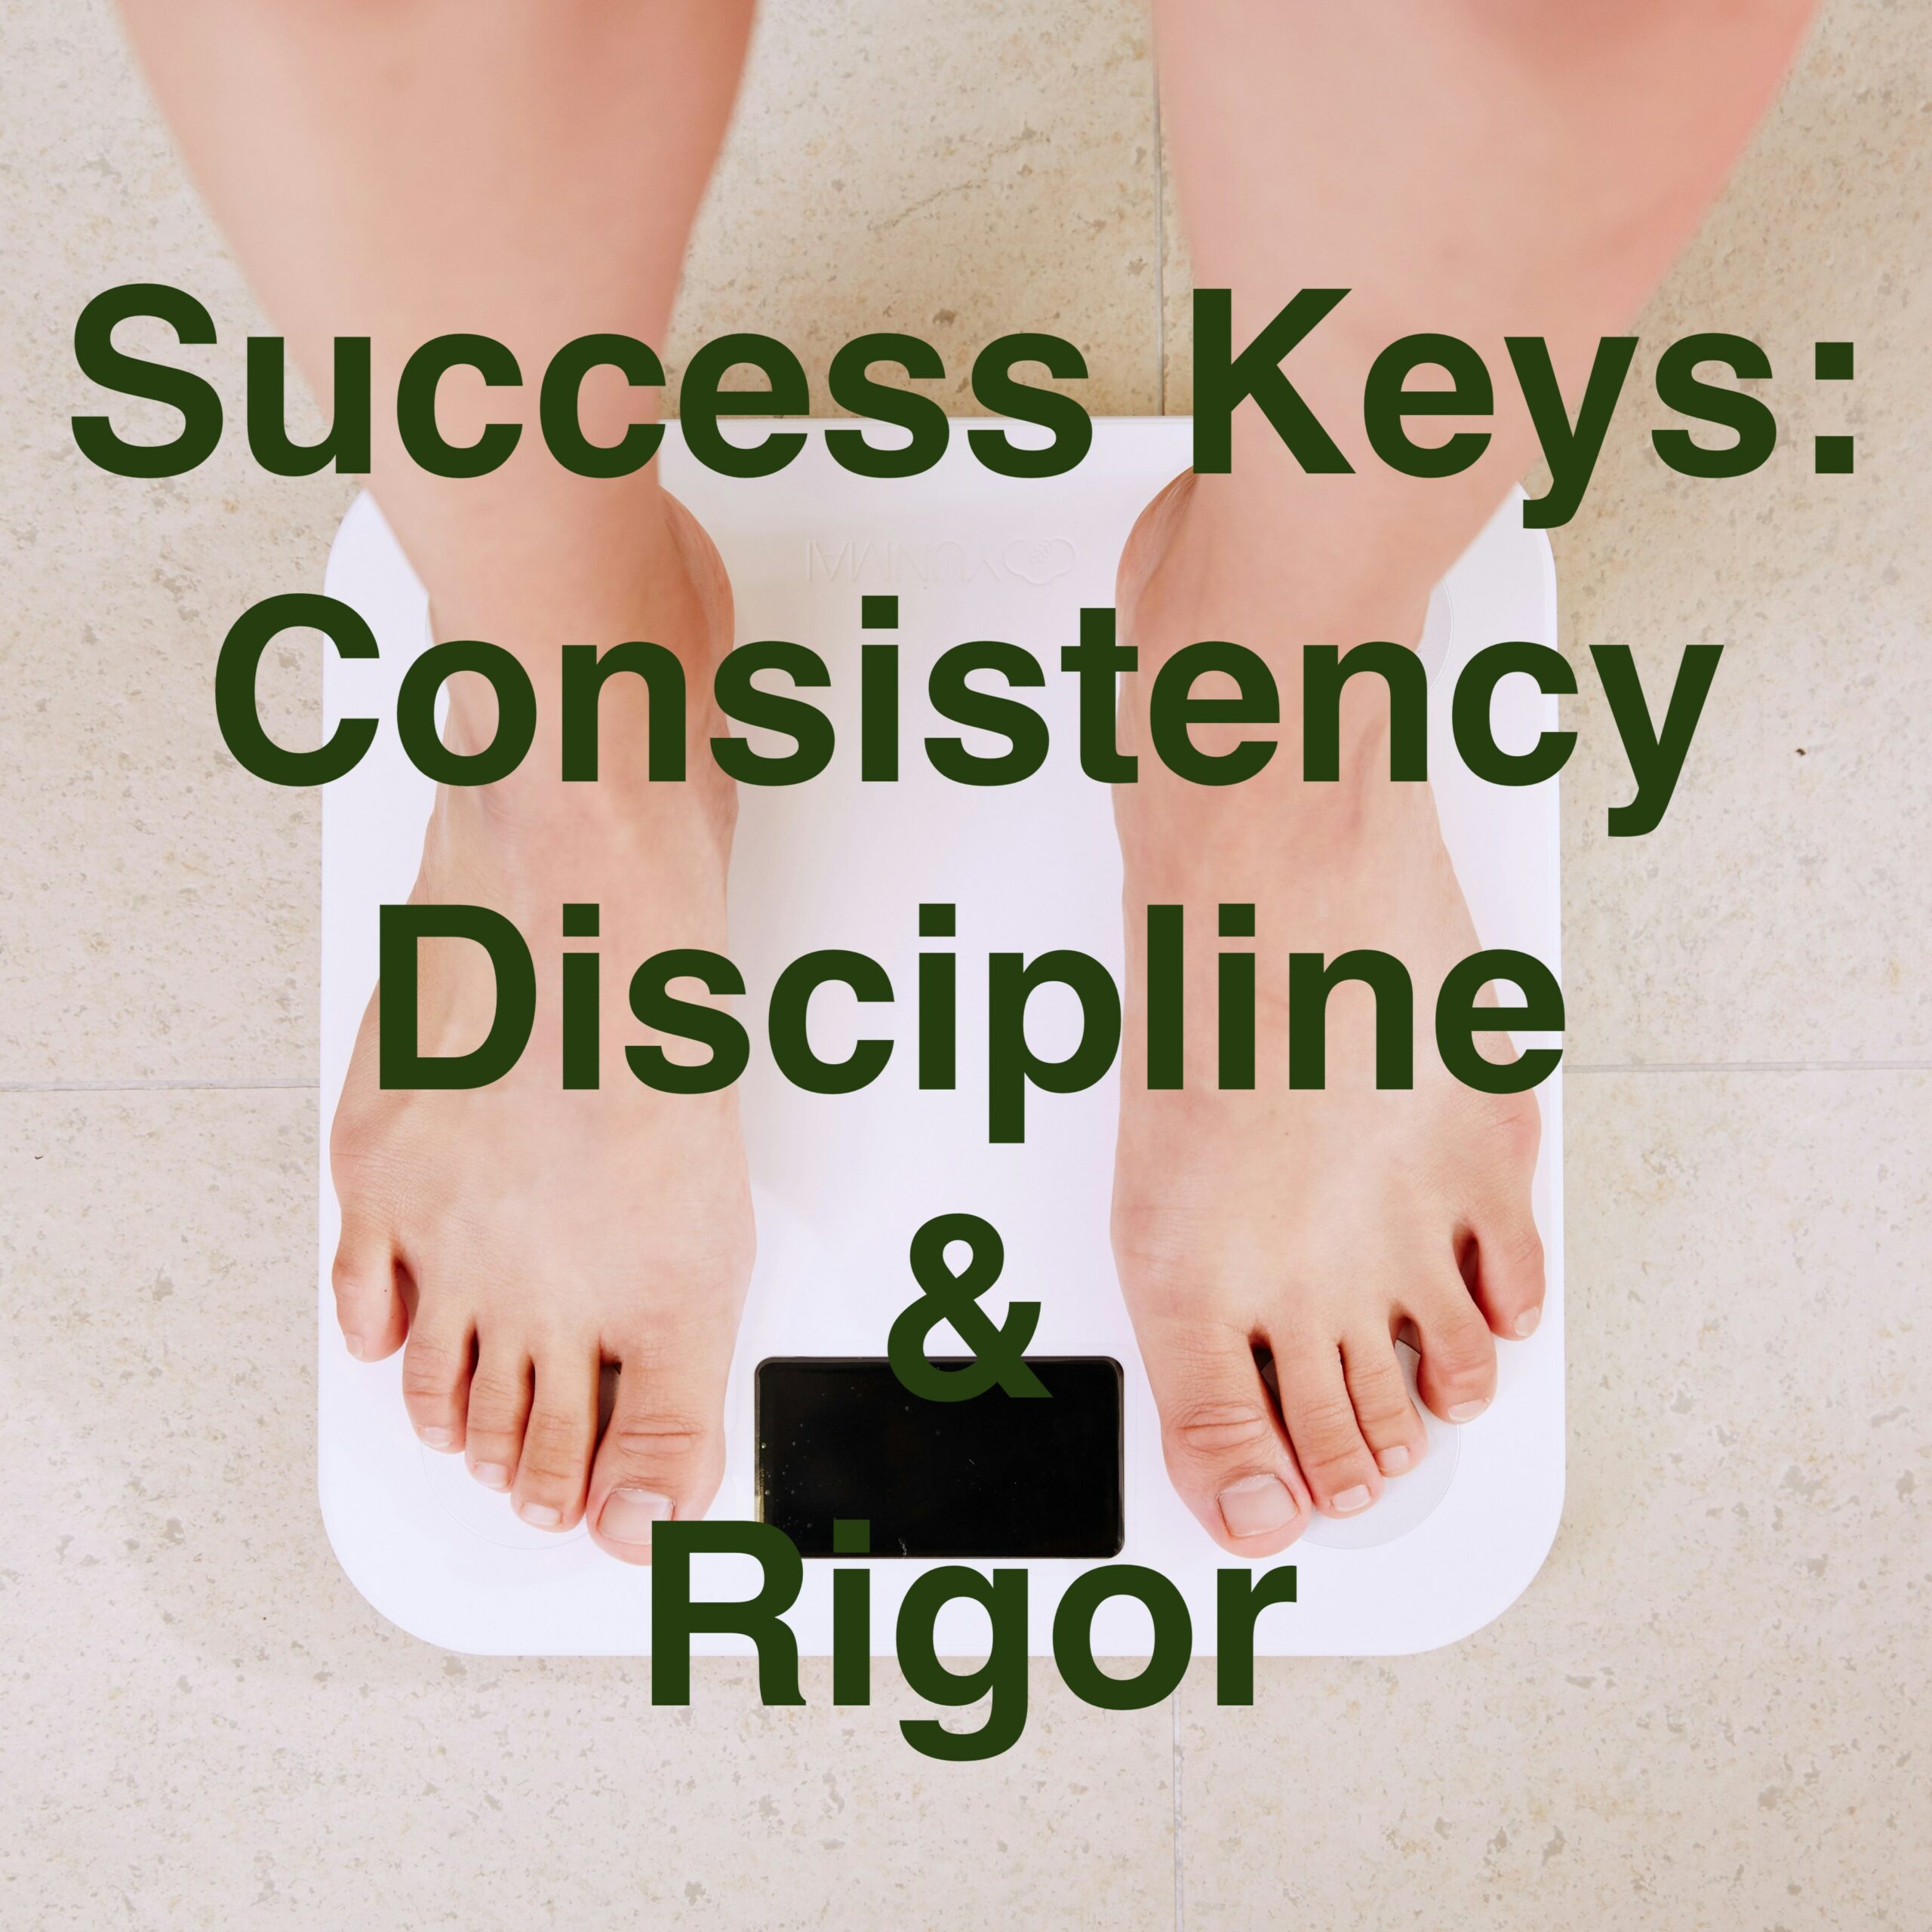 Picture of feet on a scale for weight loss with Intermittent fasting in 2024 article: the text above says: Success Keys: Consistency, Discipline and Rigor"